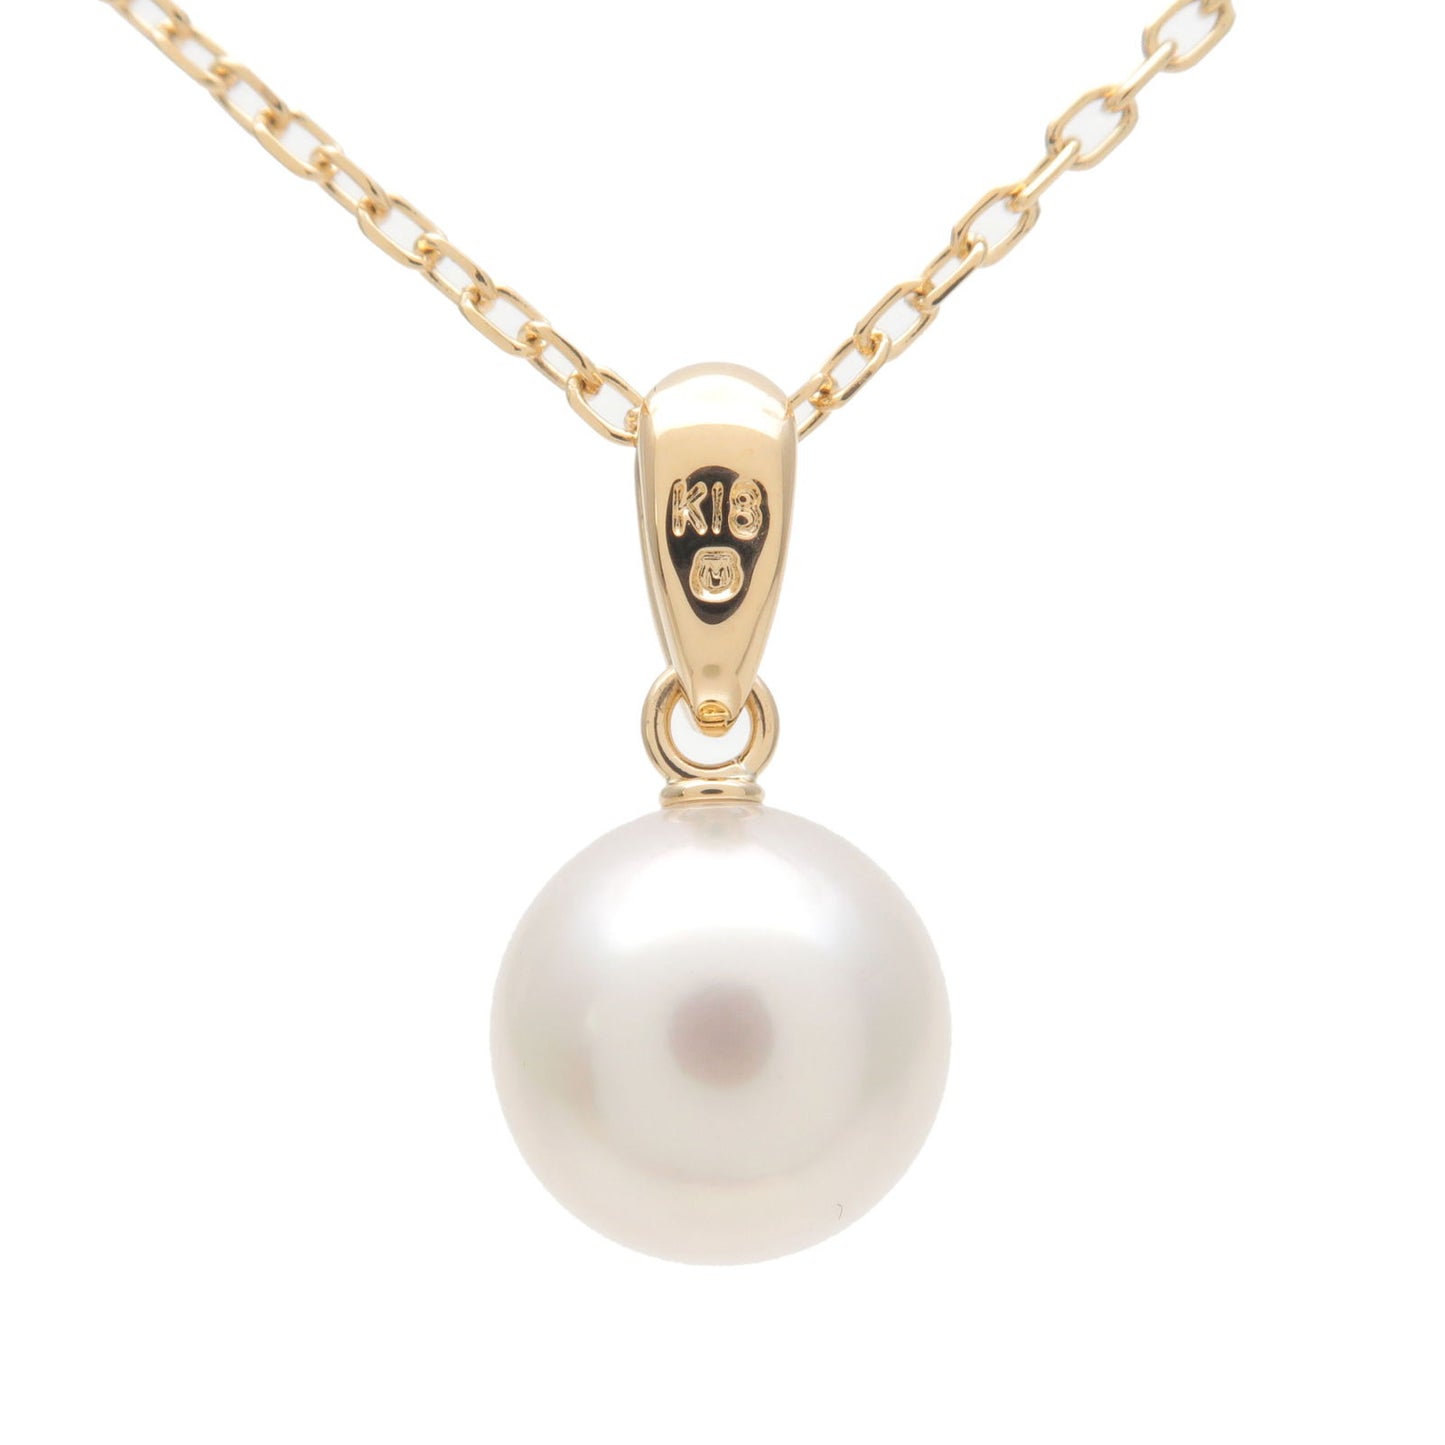 MIKIMOTO Pearl Necklace Pendant 8.0mm K18YG 750YG Yellow Gold